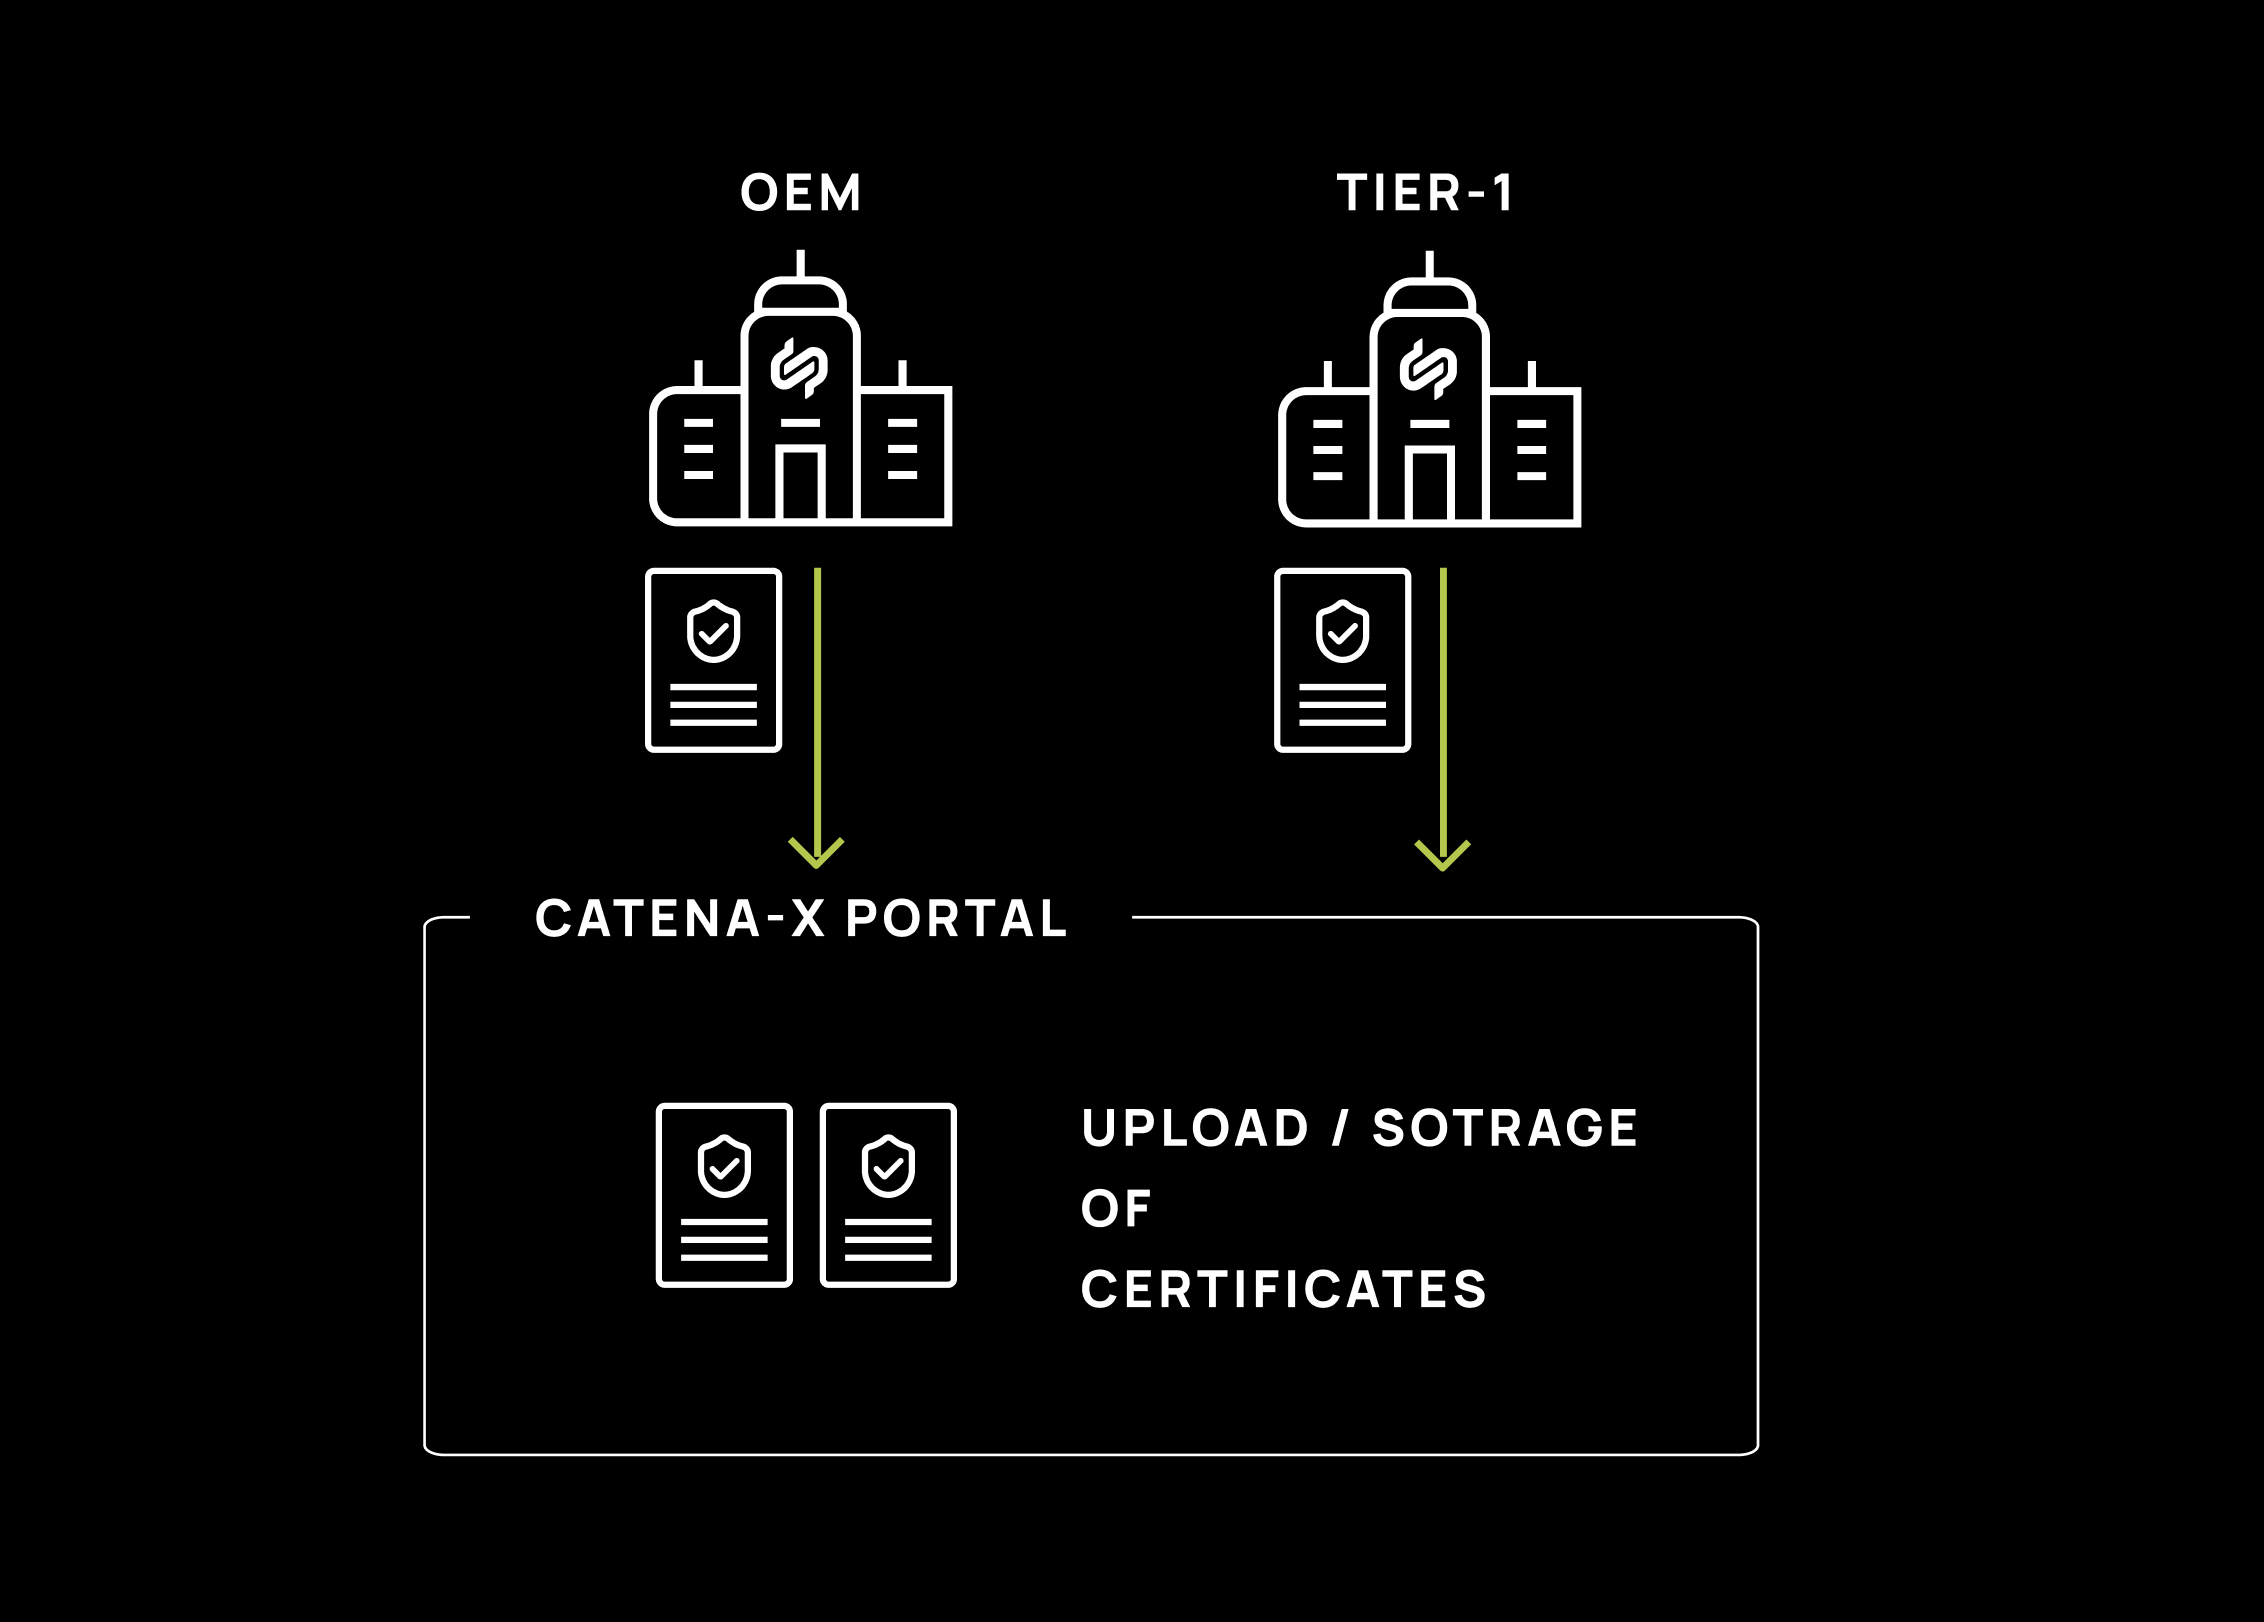 Certificate management use case 2